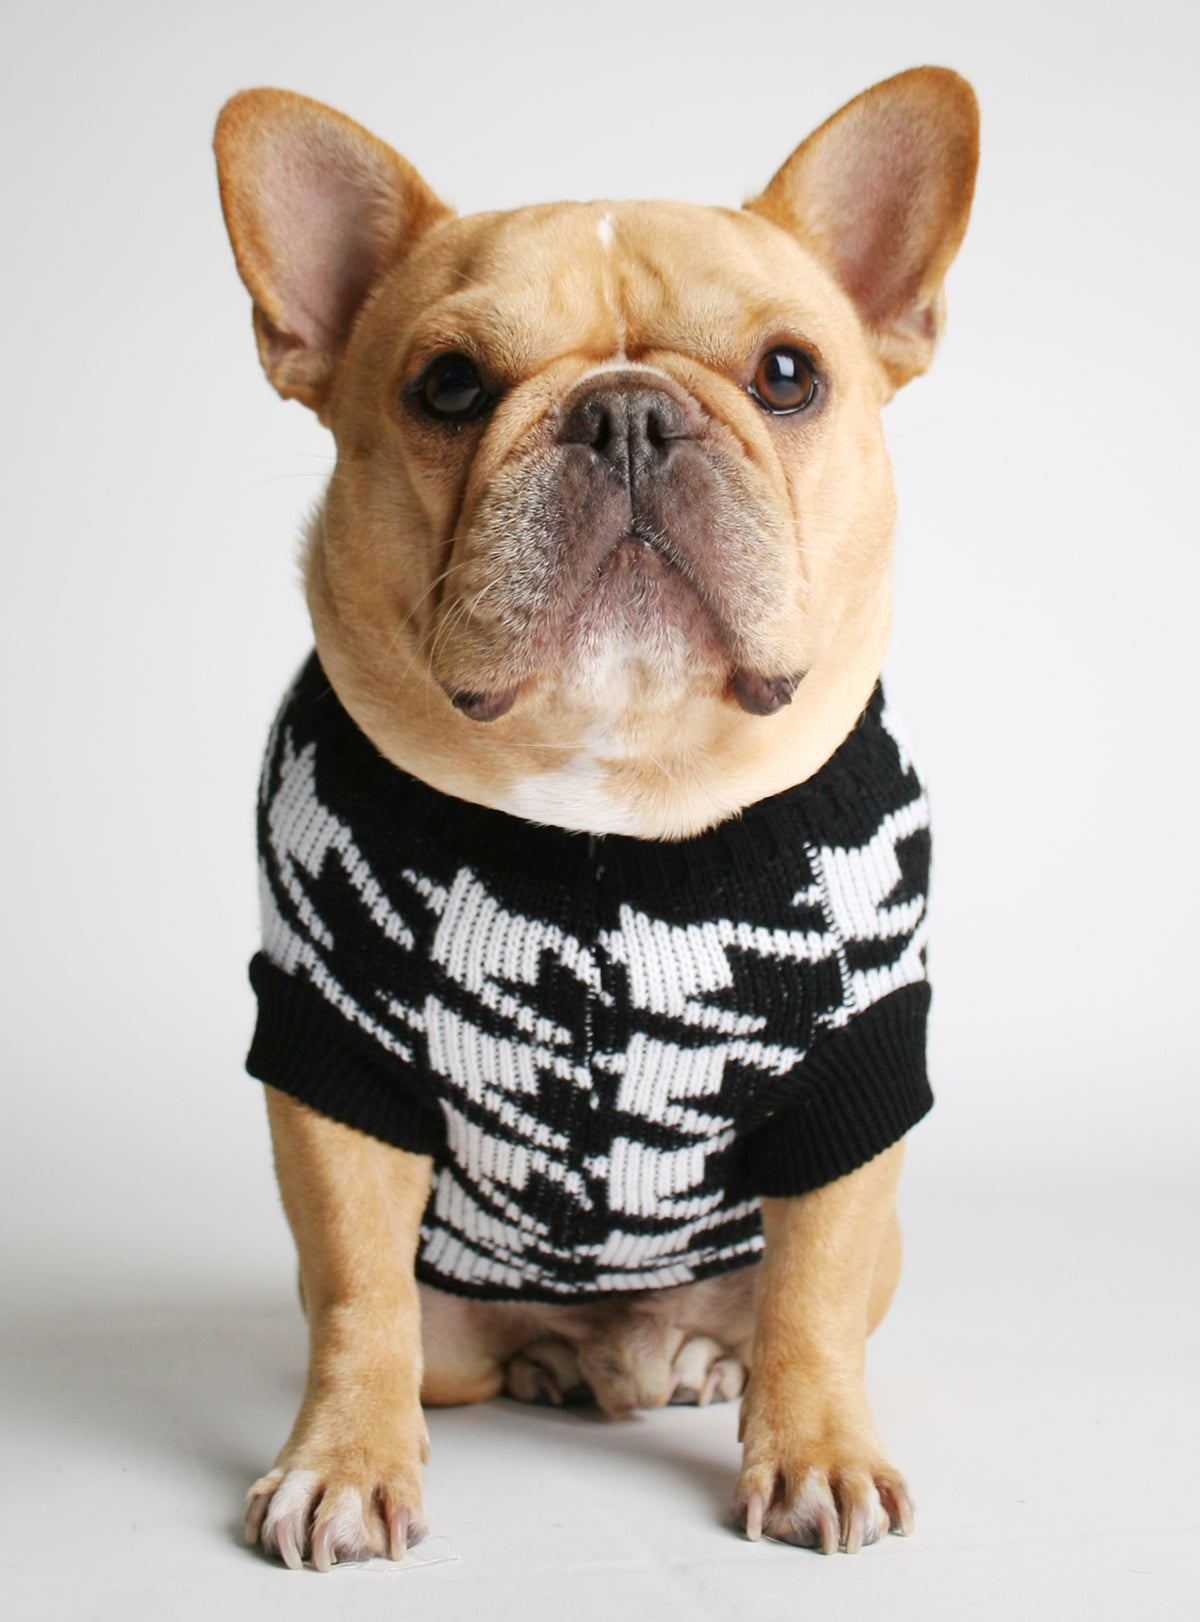 The Whiteout Dog Sweater